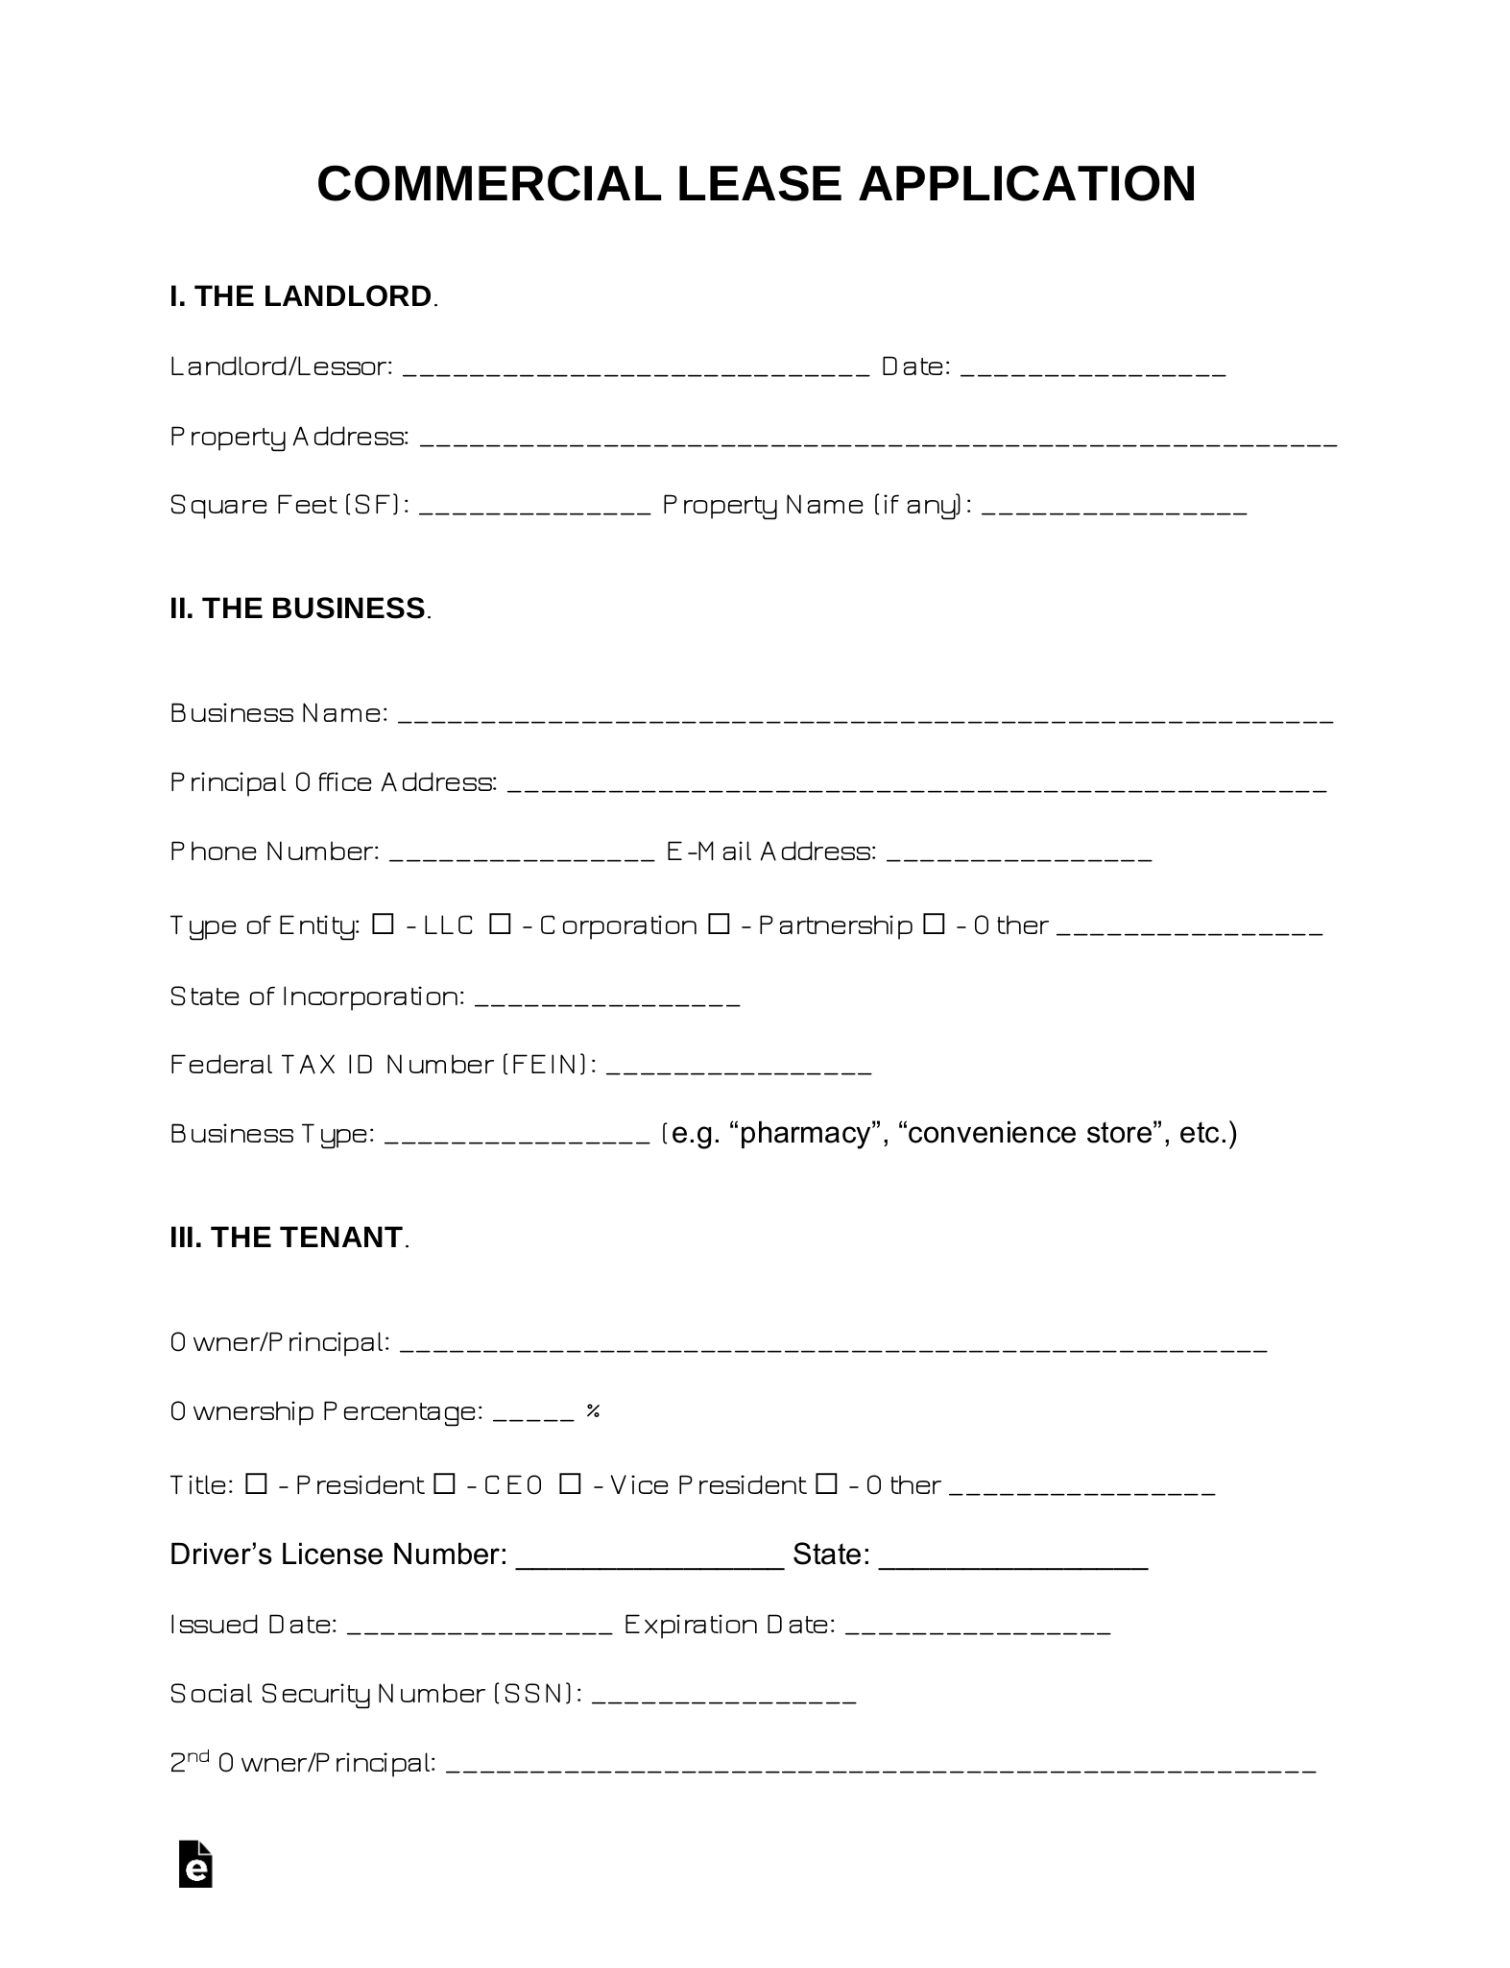 eForms Commercial Application Form